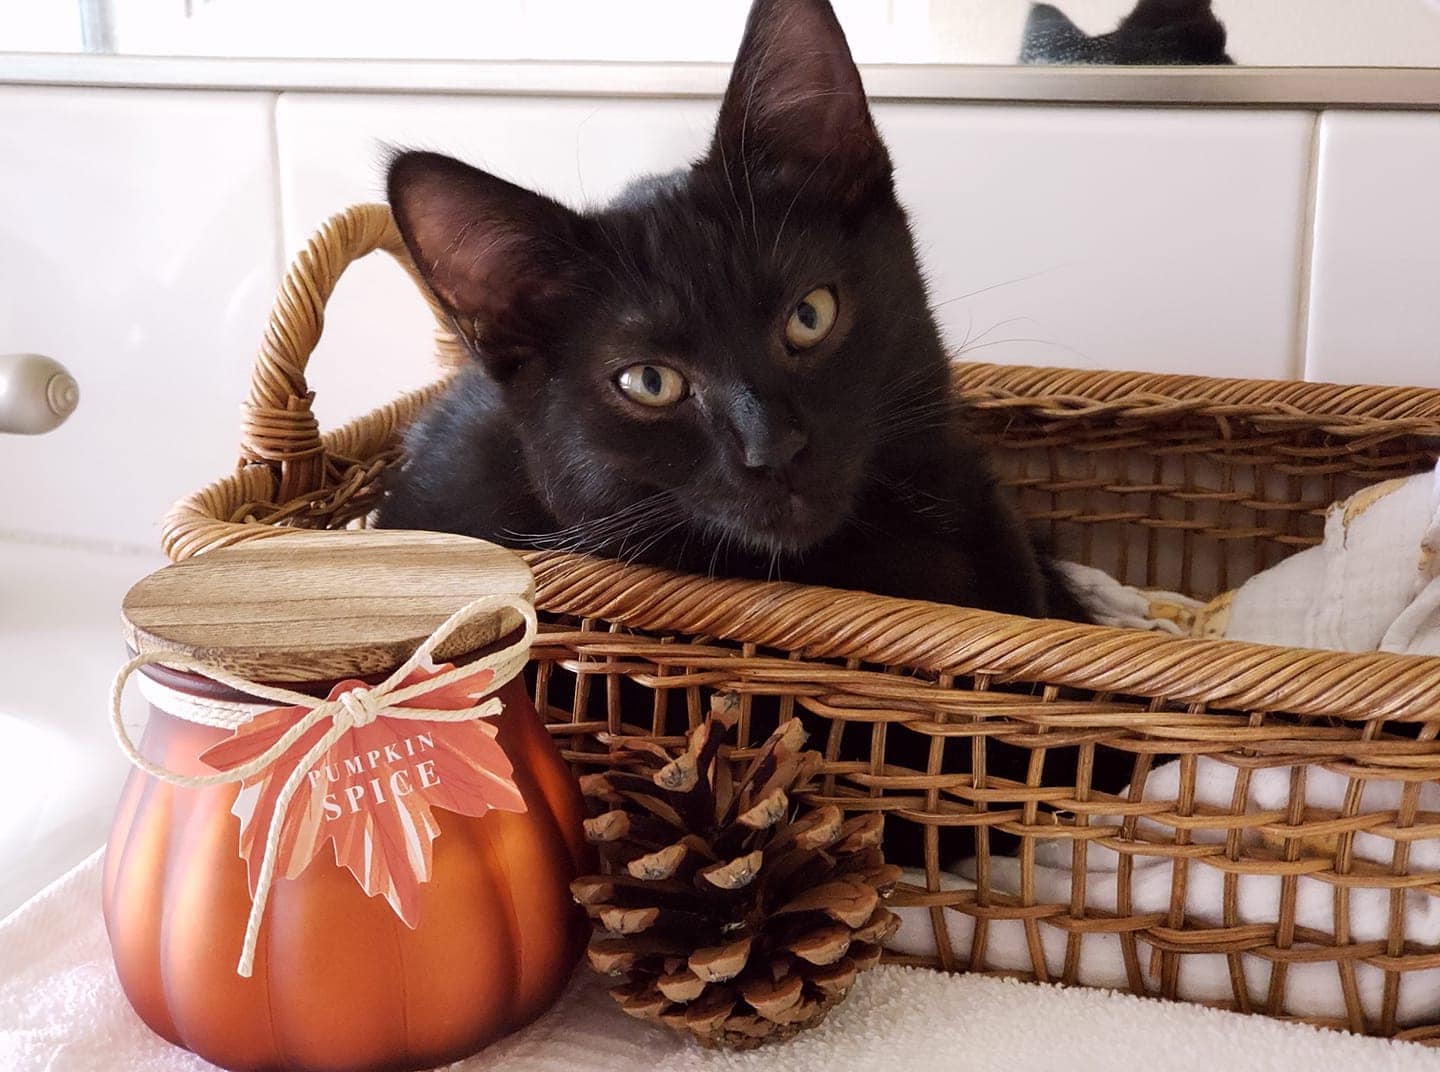 A black kitten gets in the fall mood by sitting in a wicker basket next to a pumpkin spice candle and a pine cone.............